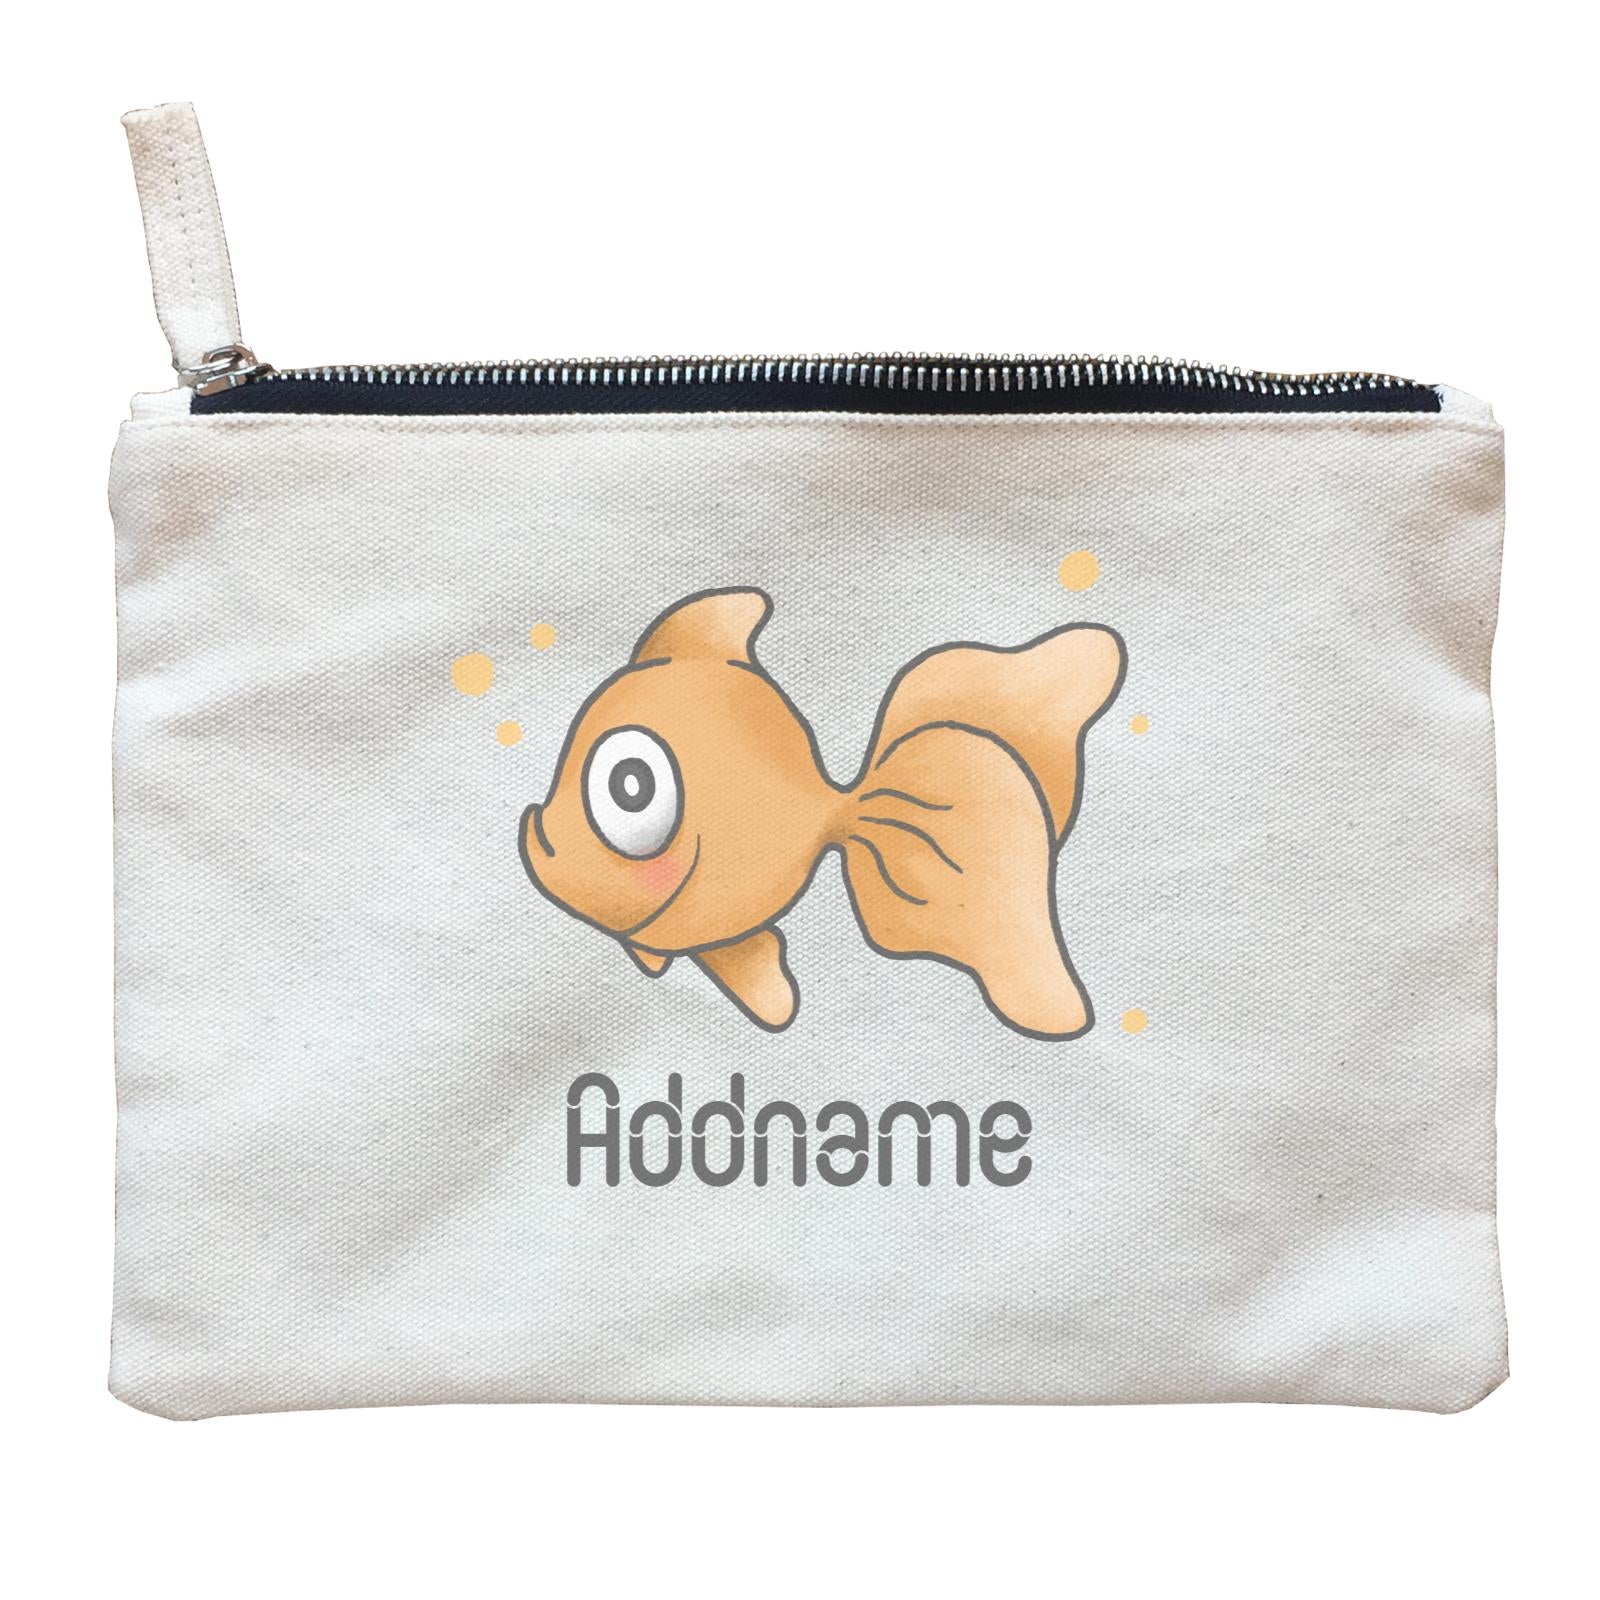 Cute Hand Drawn Style Goldfish Addname Zipper Pouch